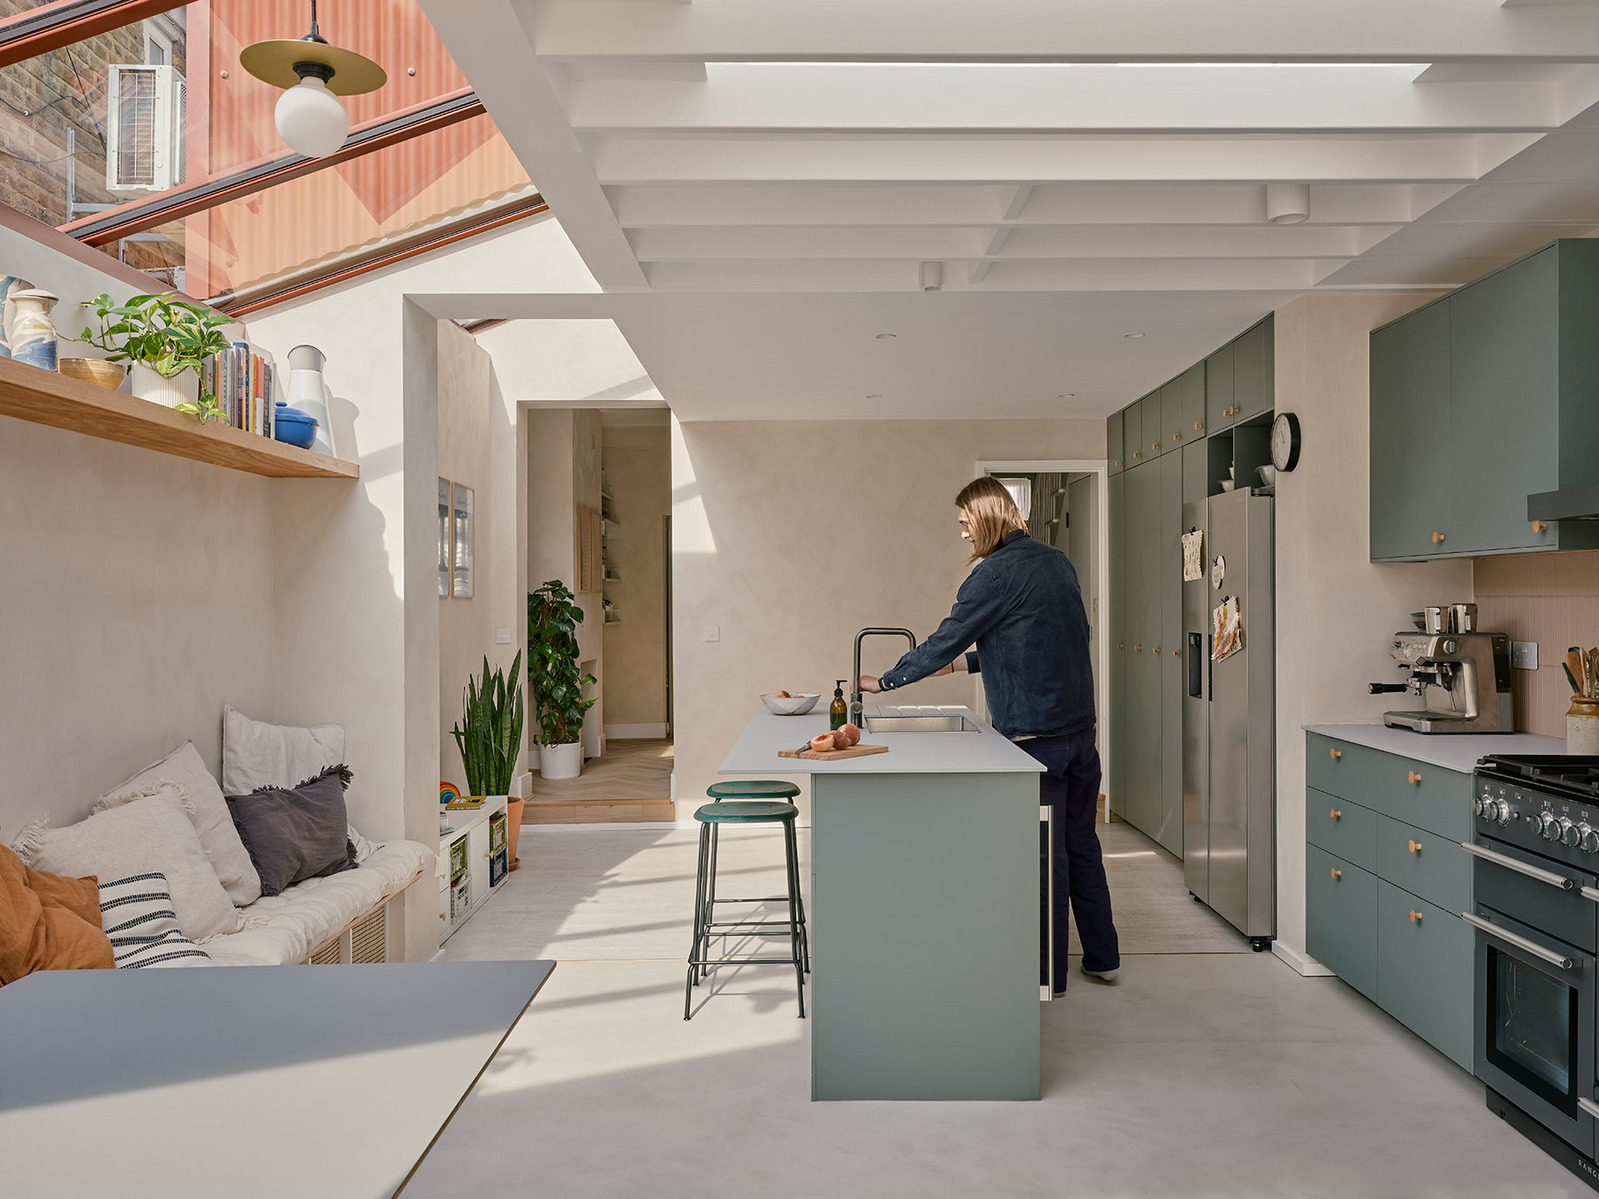 Interior Photography of kitchen by architecture studio Mike Tuck in London